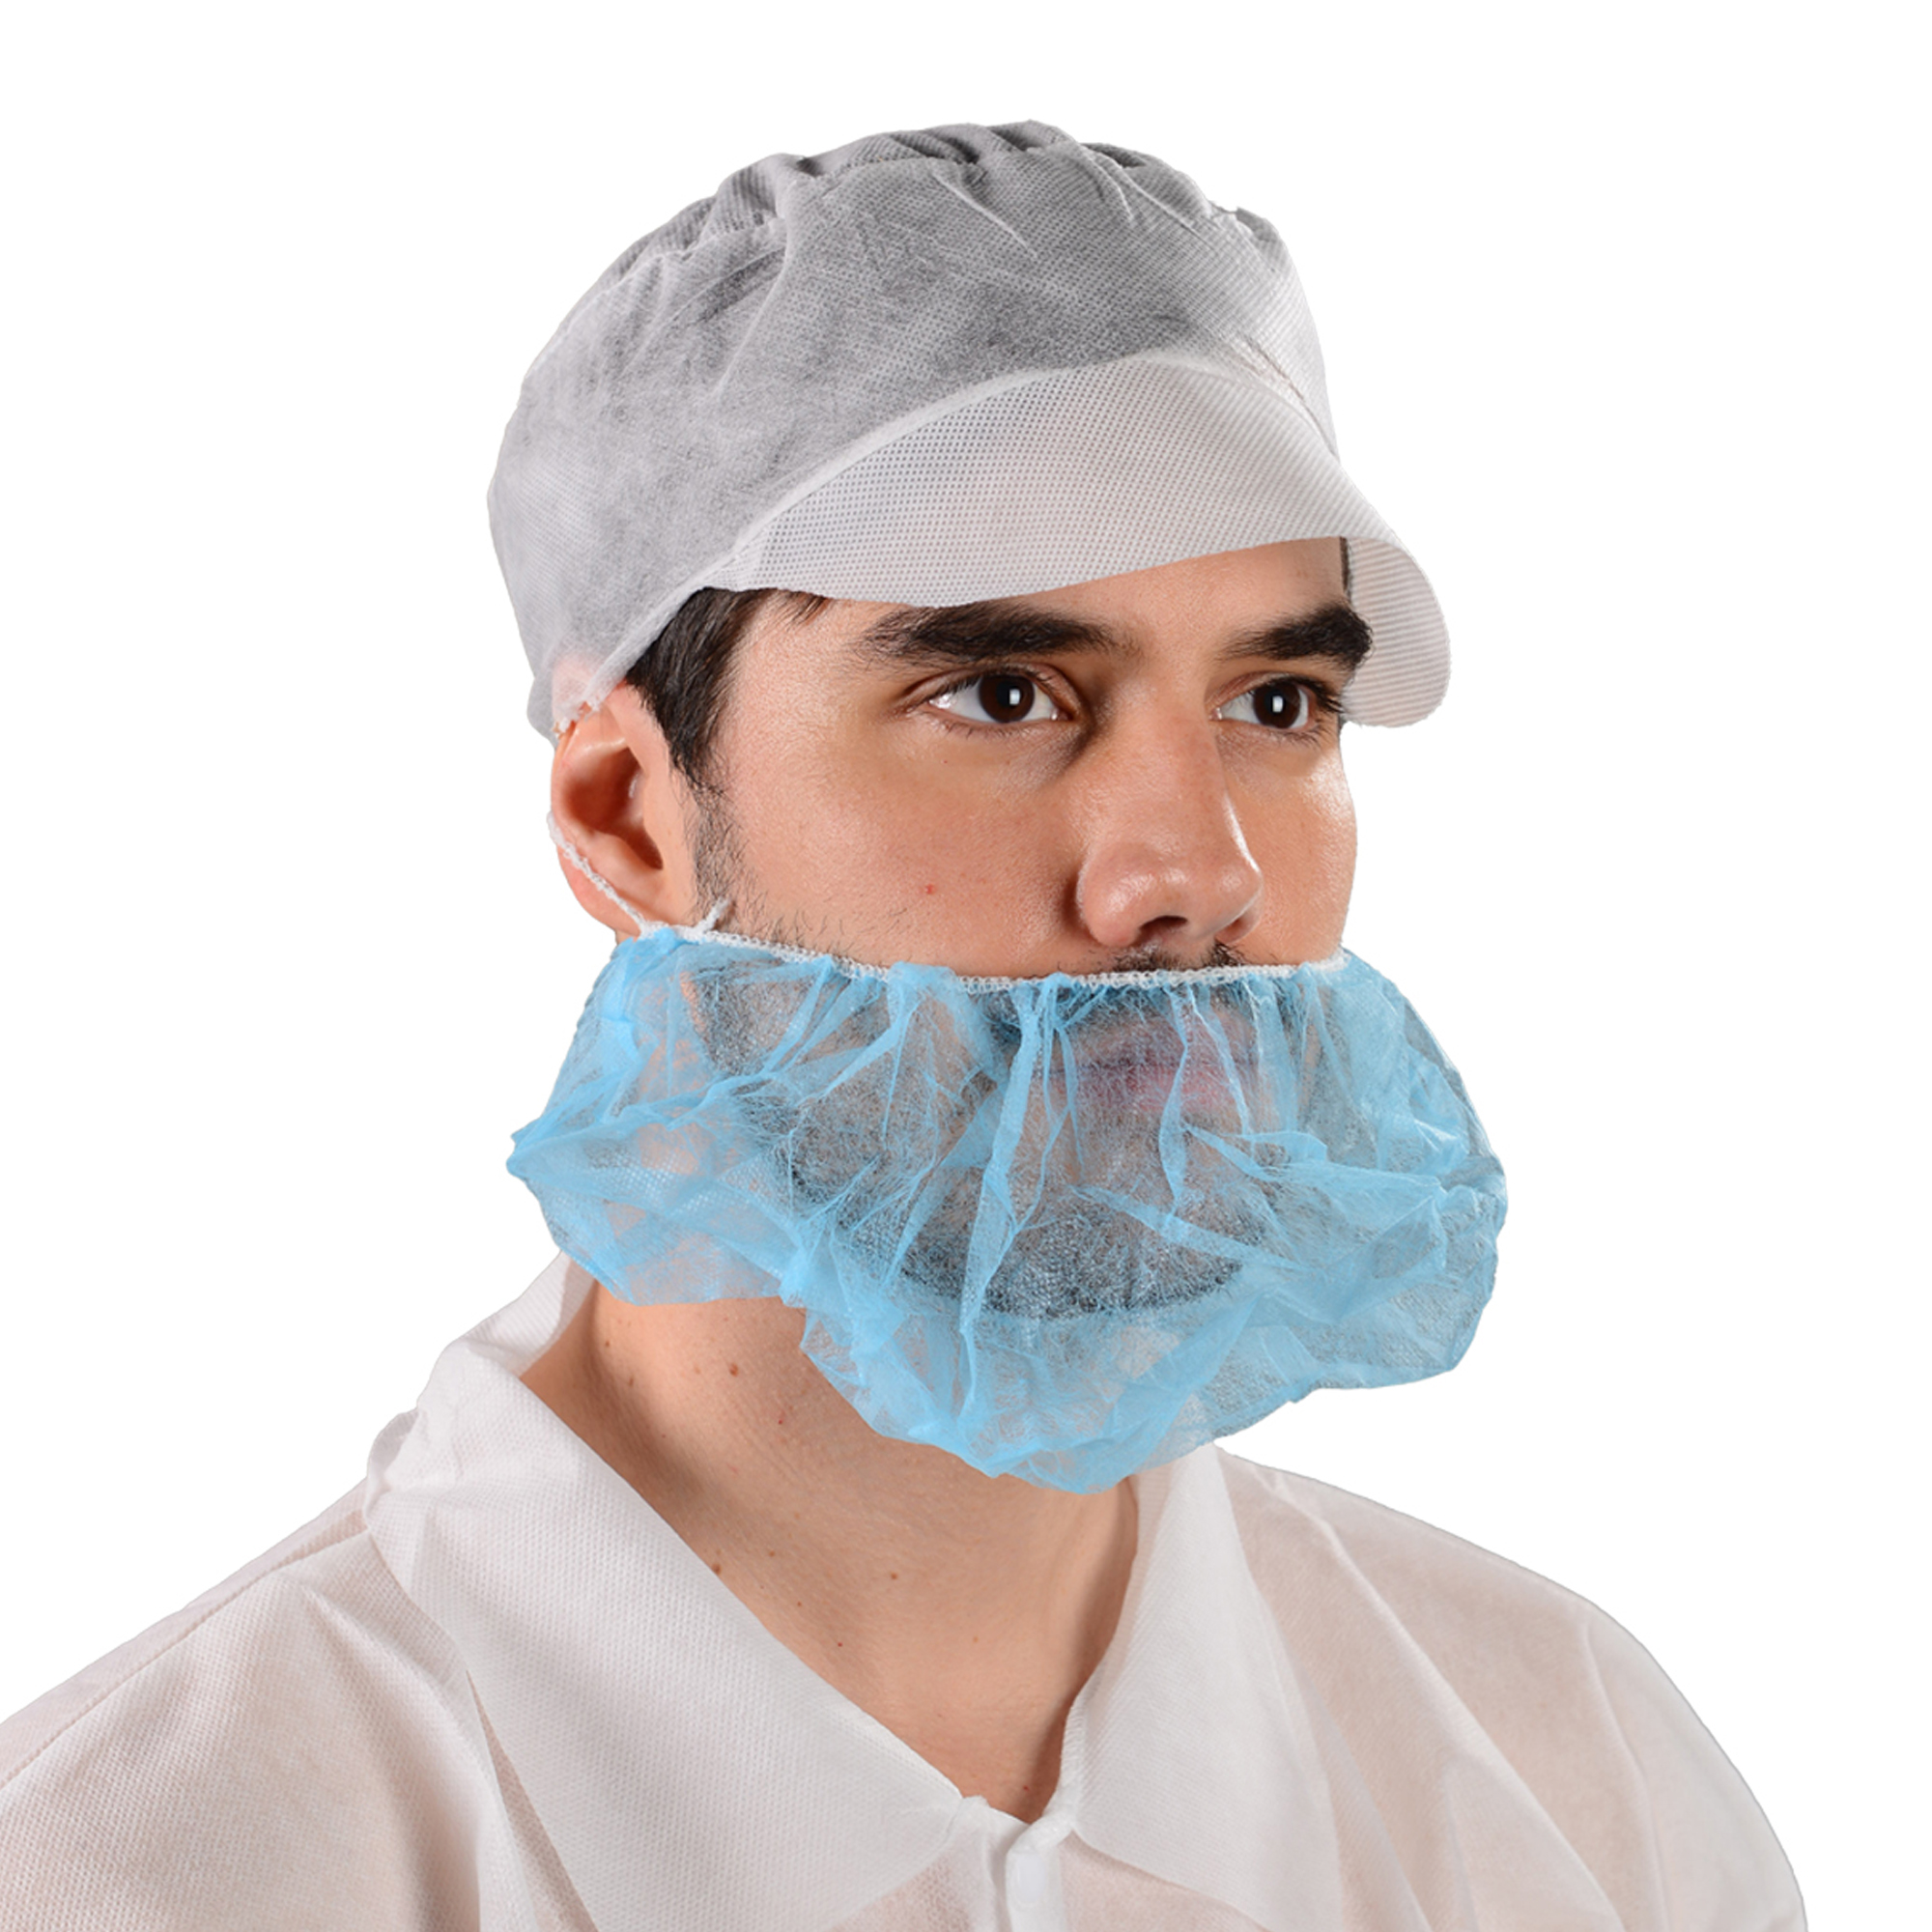 TOPMED Disposable PP Nonwoven Beard Cover White 10gsm Food Industry Single Loop Men with Single Rib Dust Proof Beard Hair Net